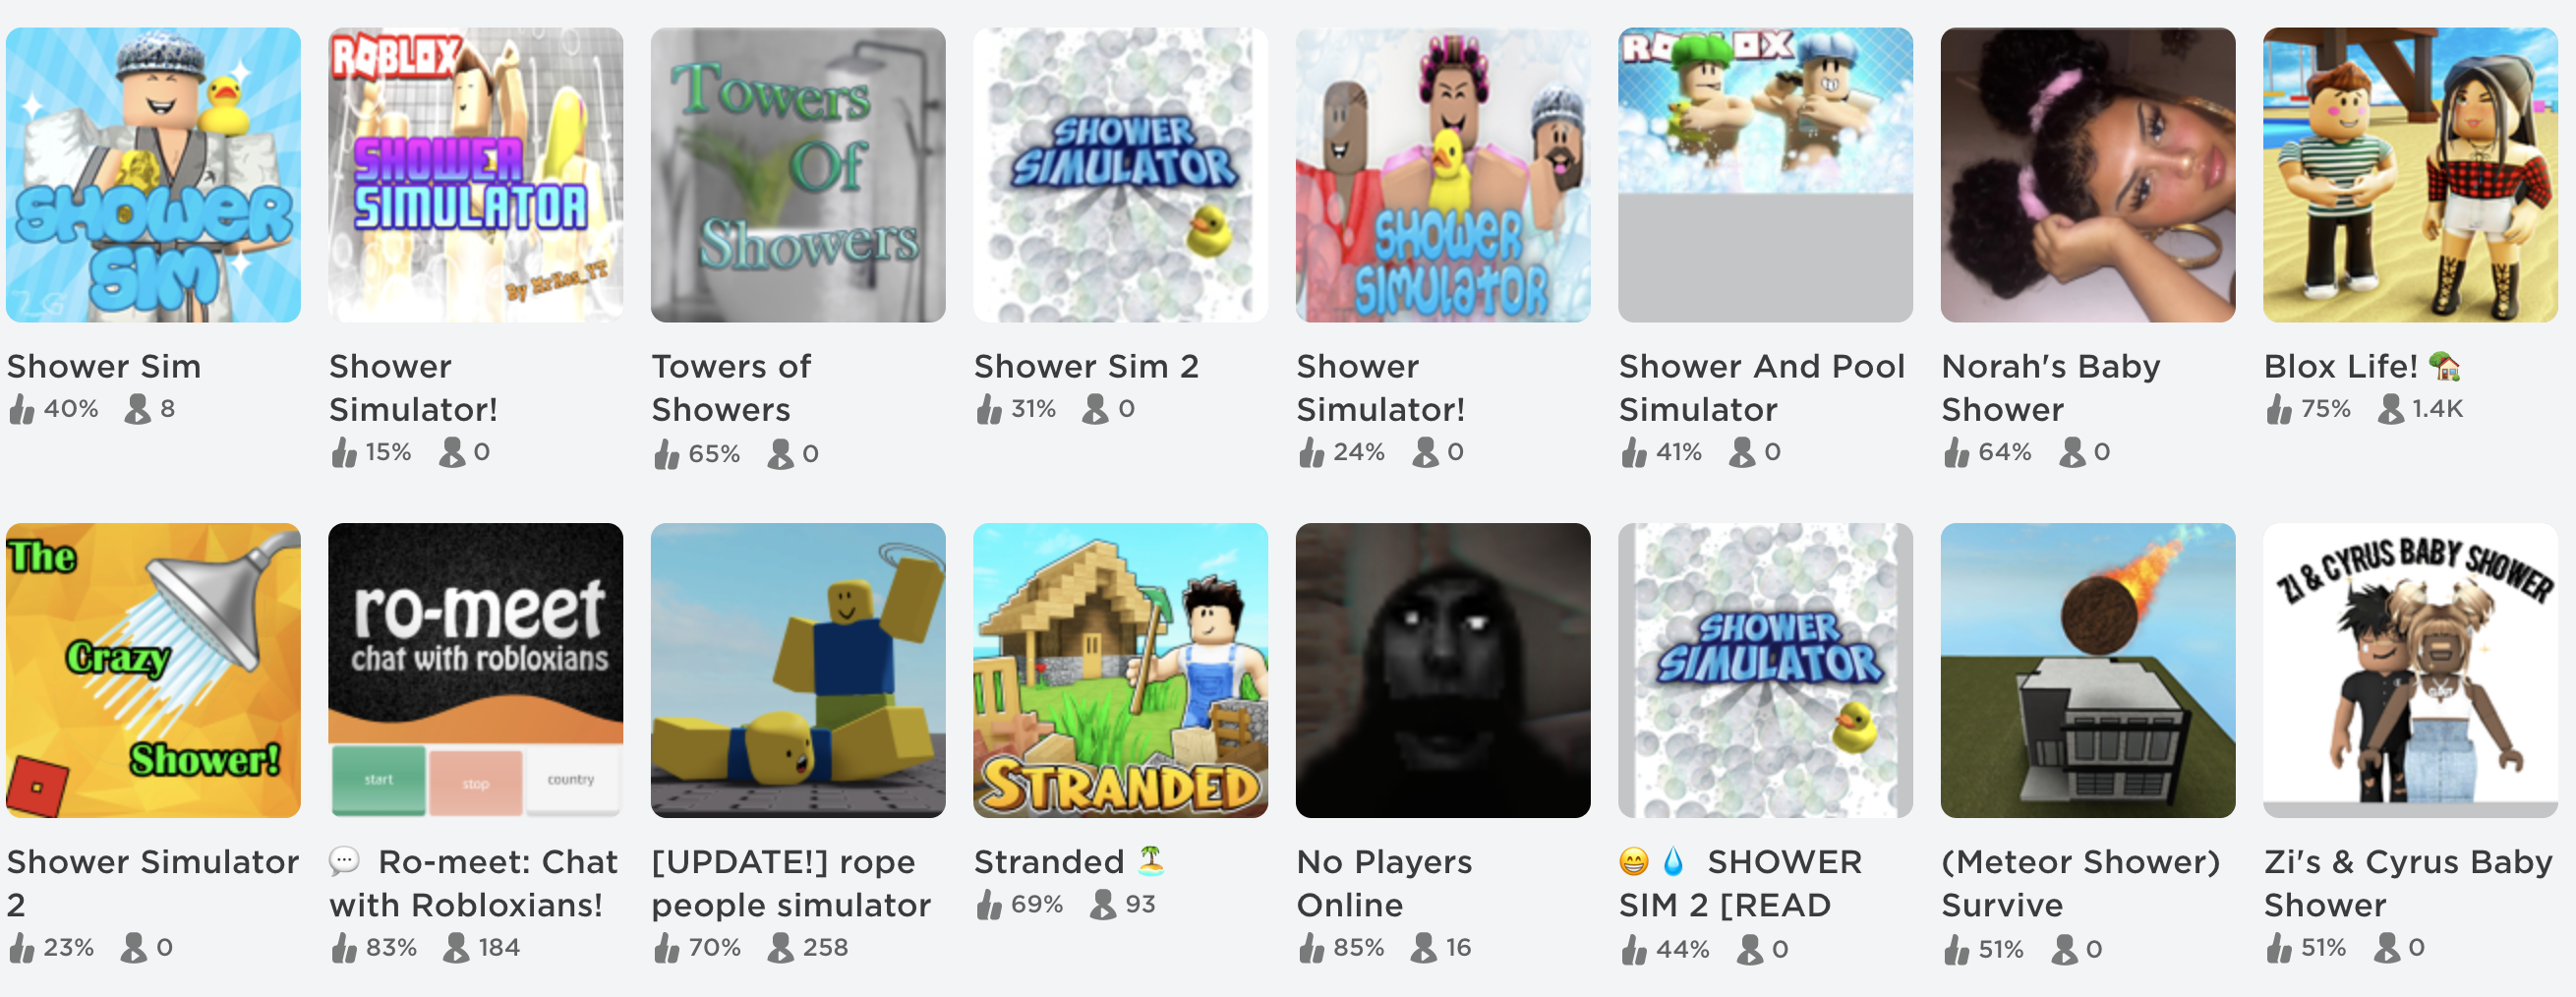 Roblox To Develop Improved Parental Controls As It Struggles With Sexually Explicit Content - who develop roblox